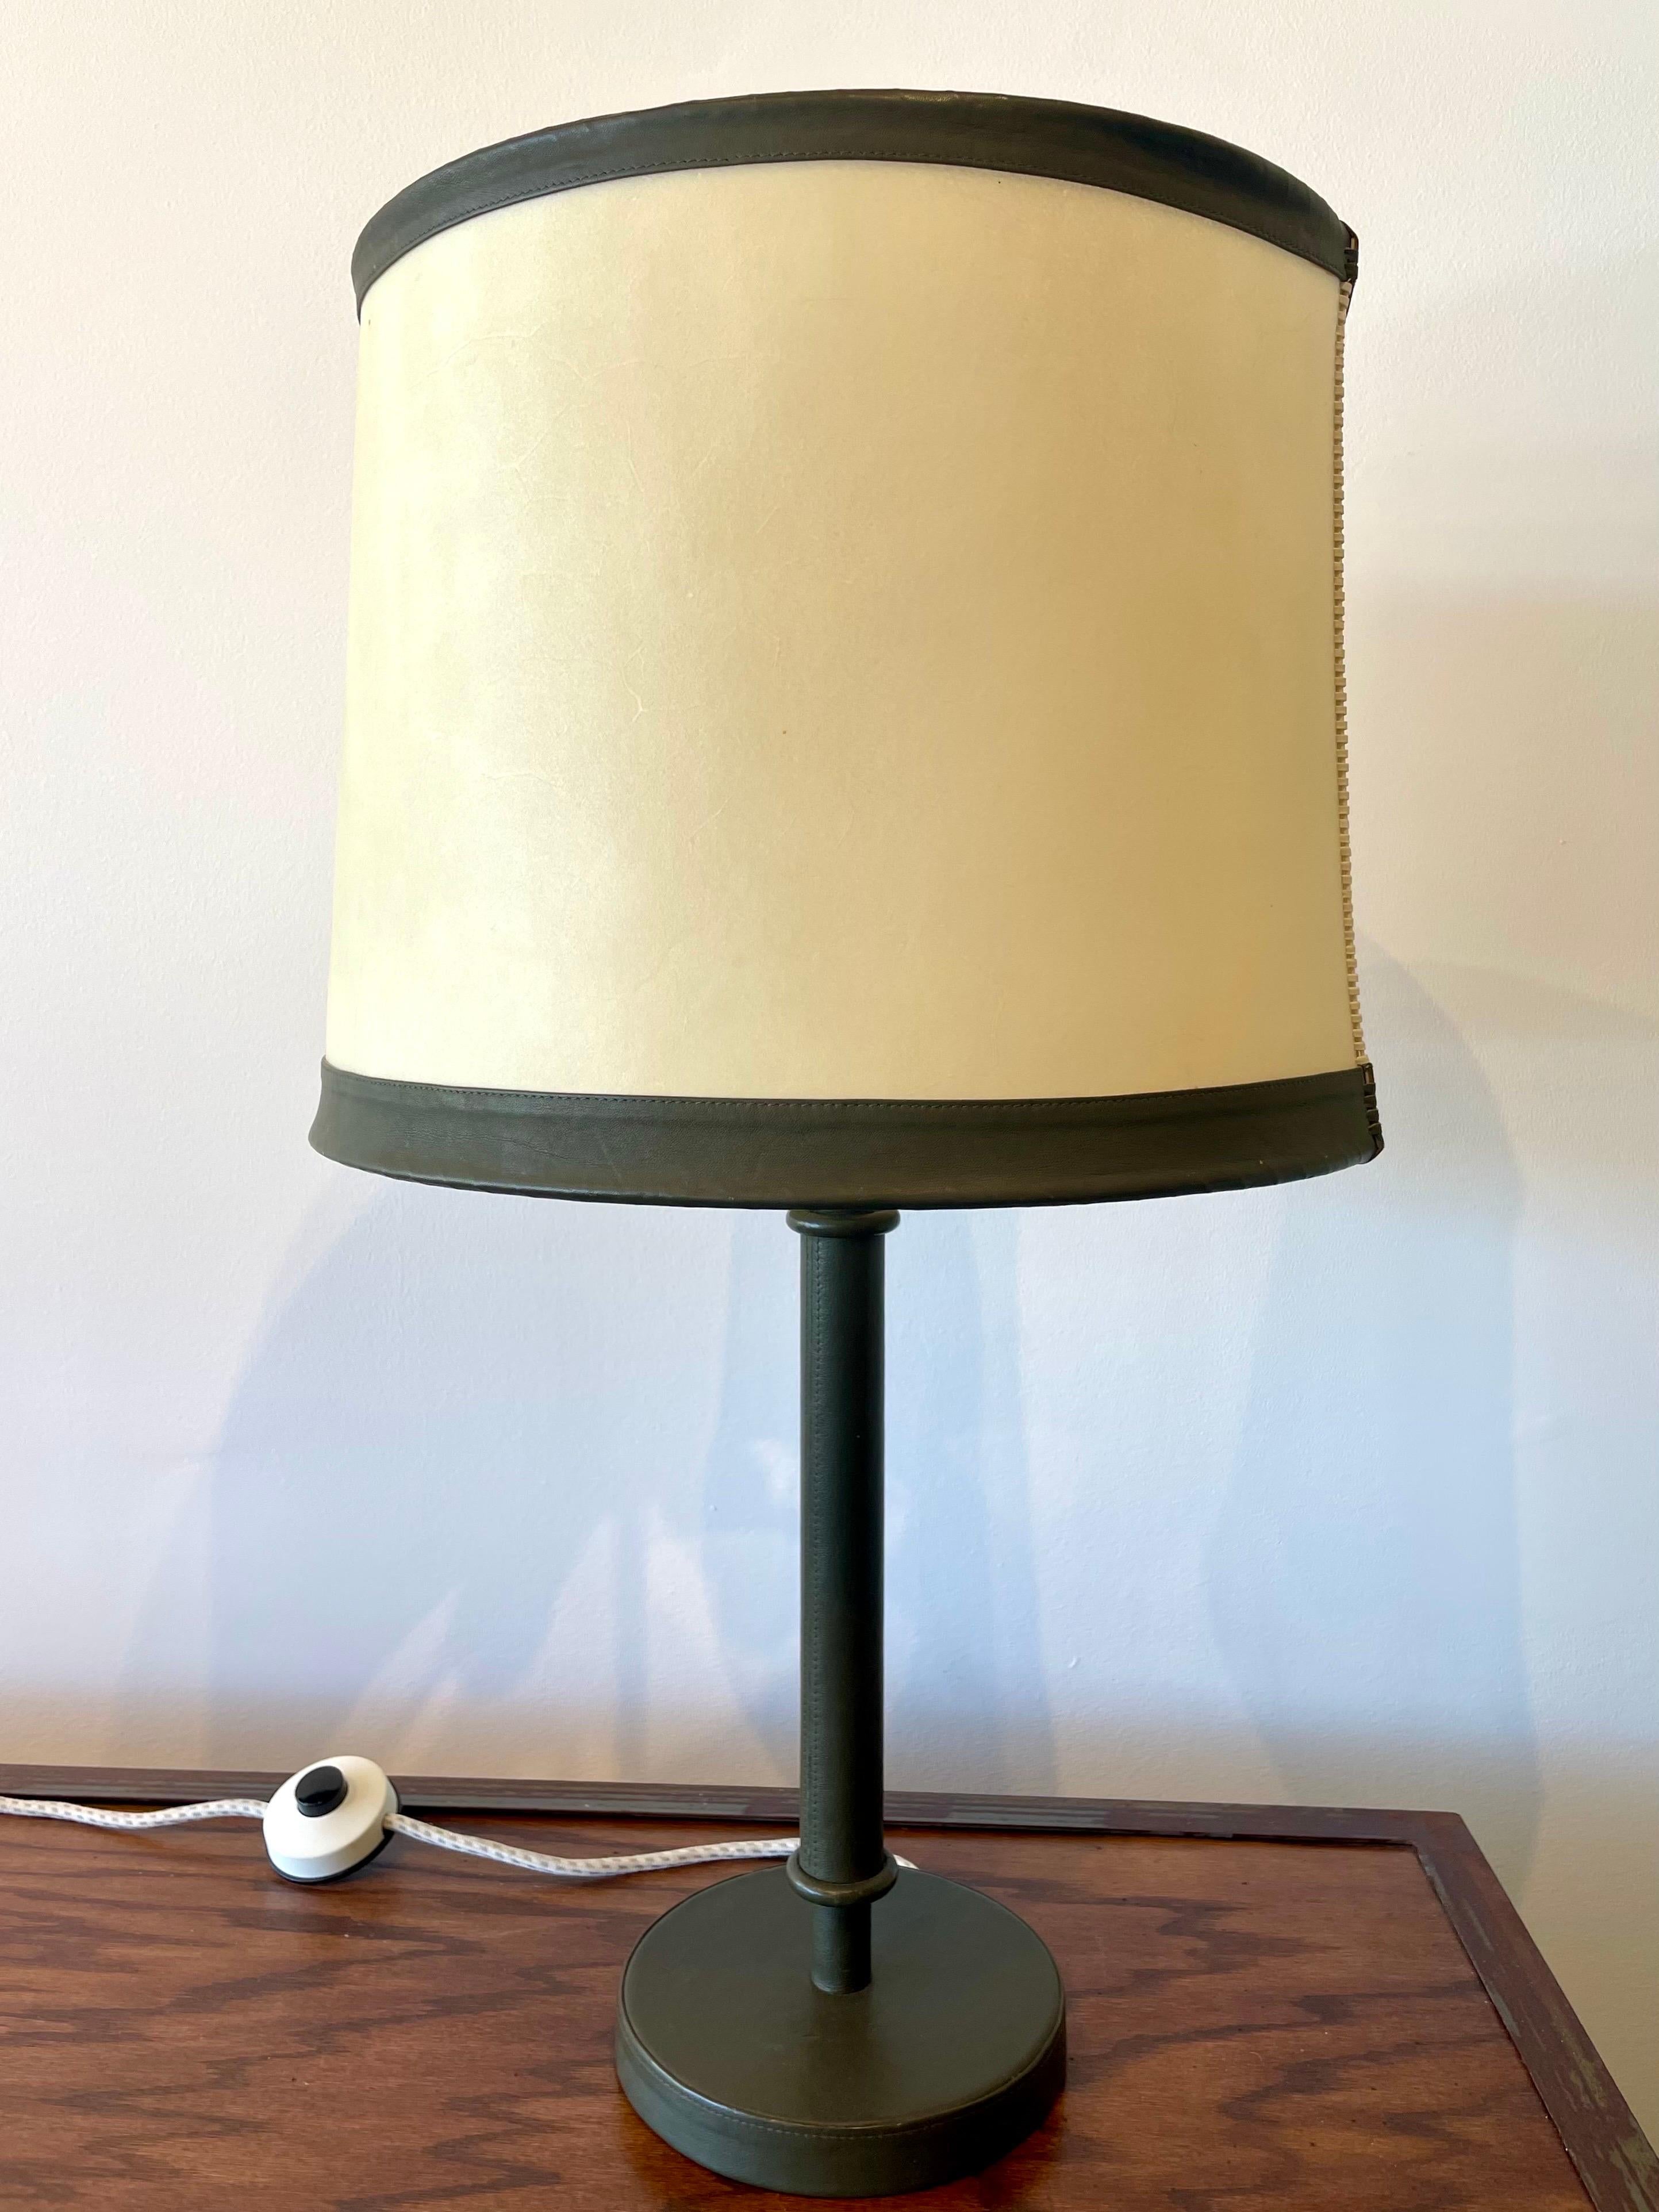 An exquisitely crafted stitched green leather table lamp with original parchment and leather trimmed lamp shade. This is rewired for US and in phenomenal vintage condition. NOTE: shade diameter 16 inches.